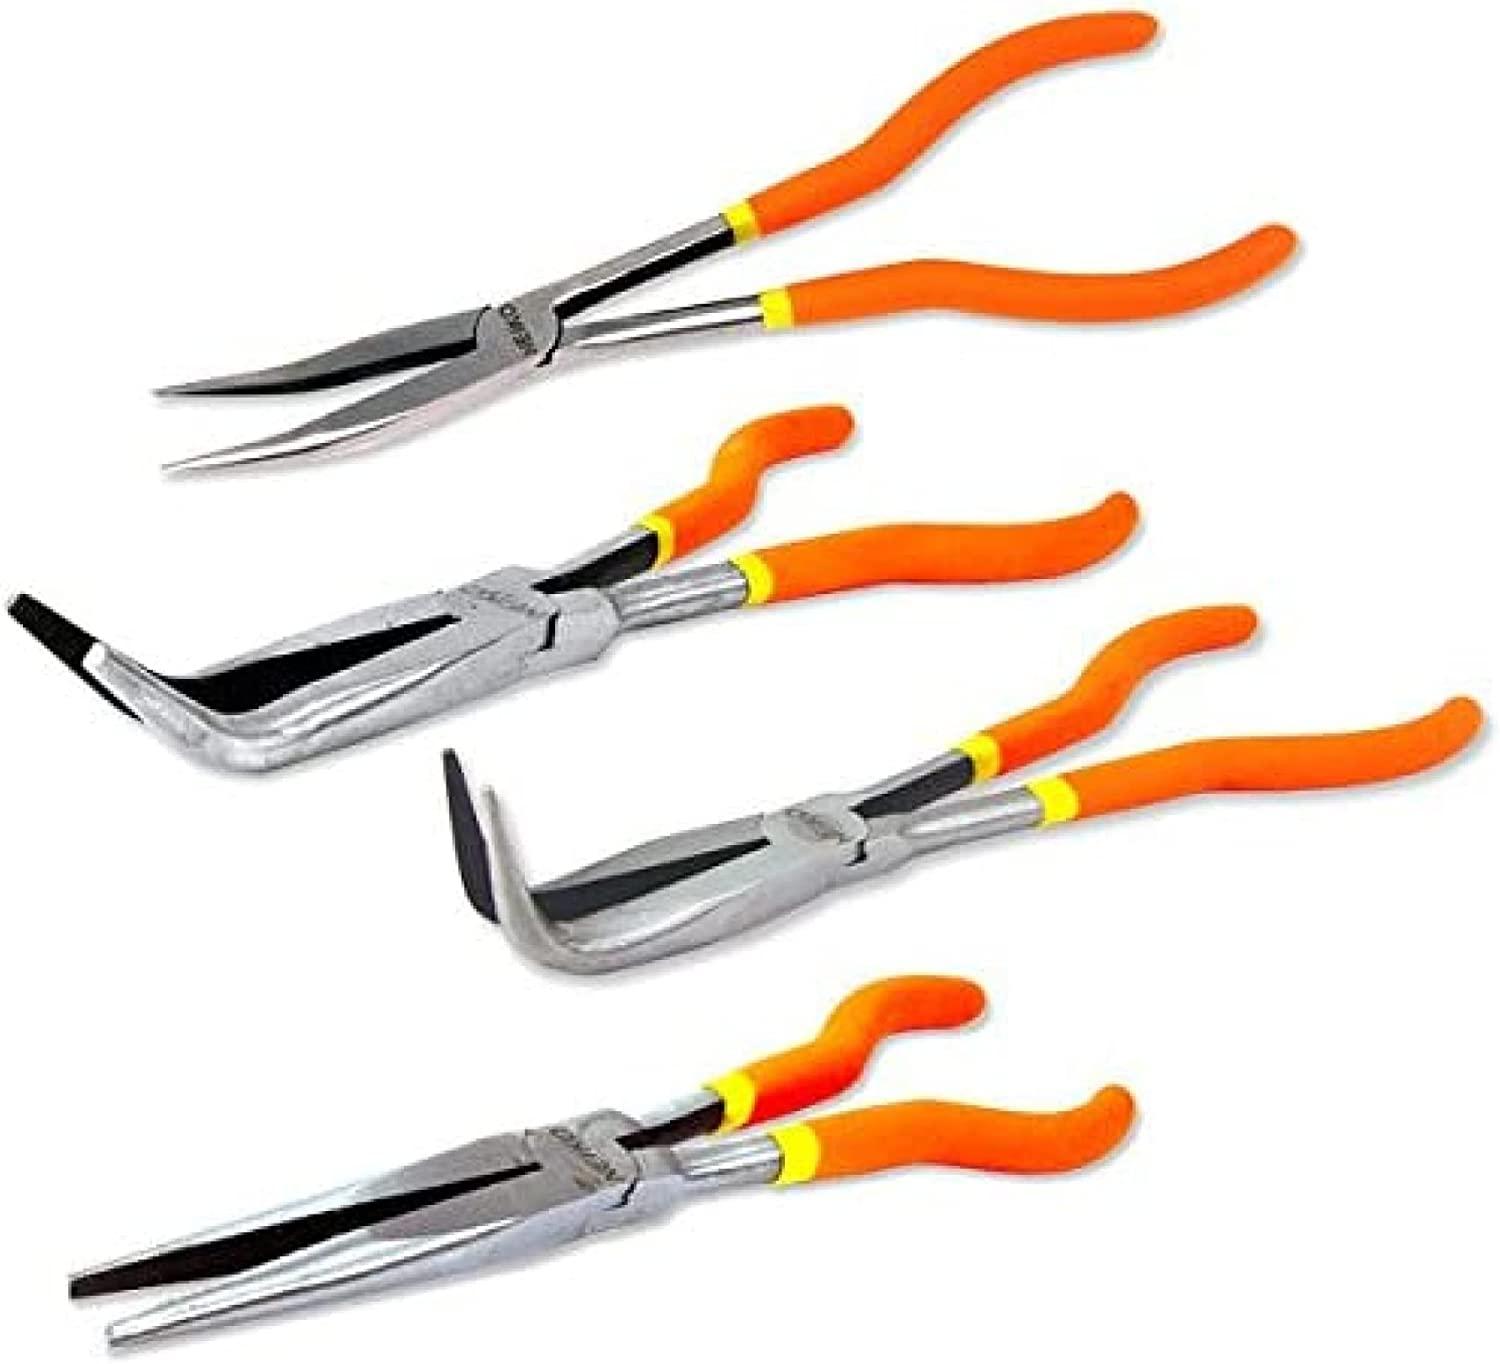 Neiko 11in Long Nose Pliers Set for $20.13